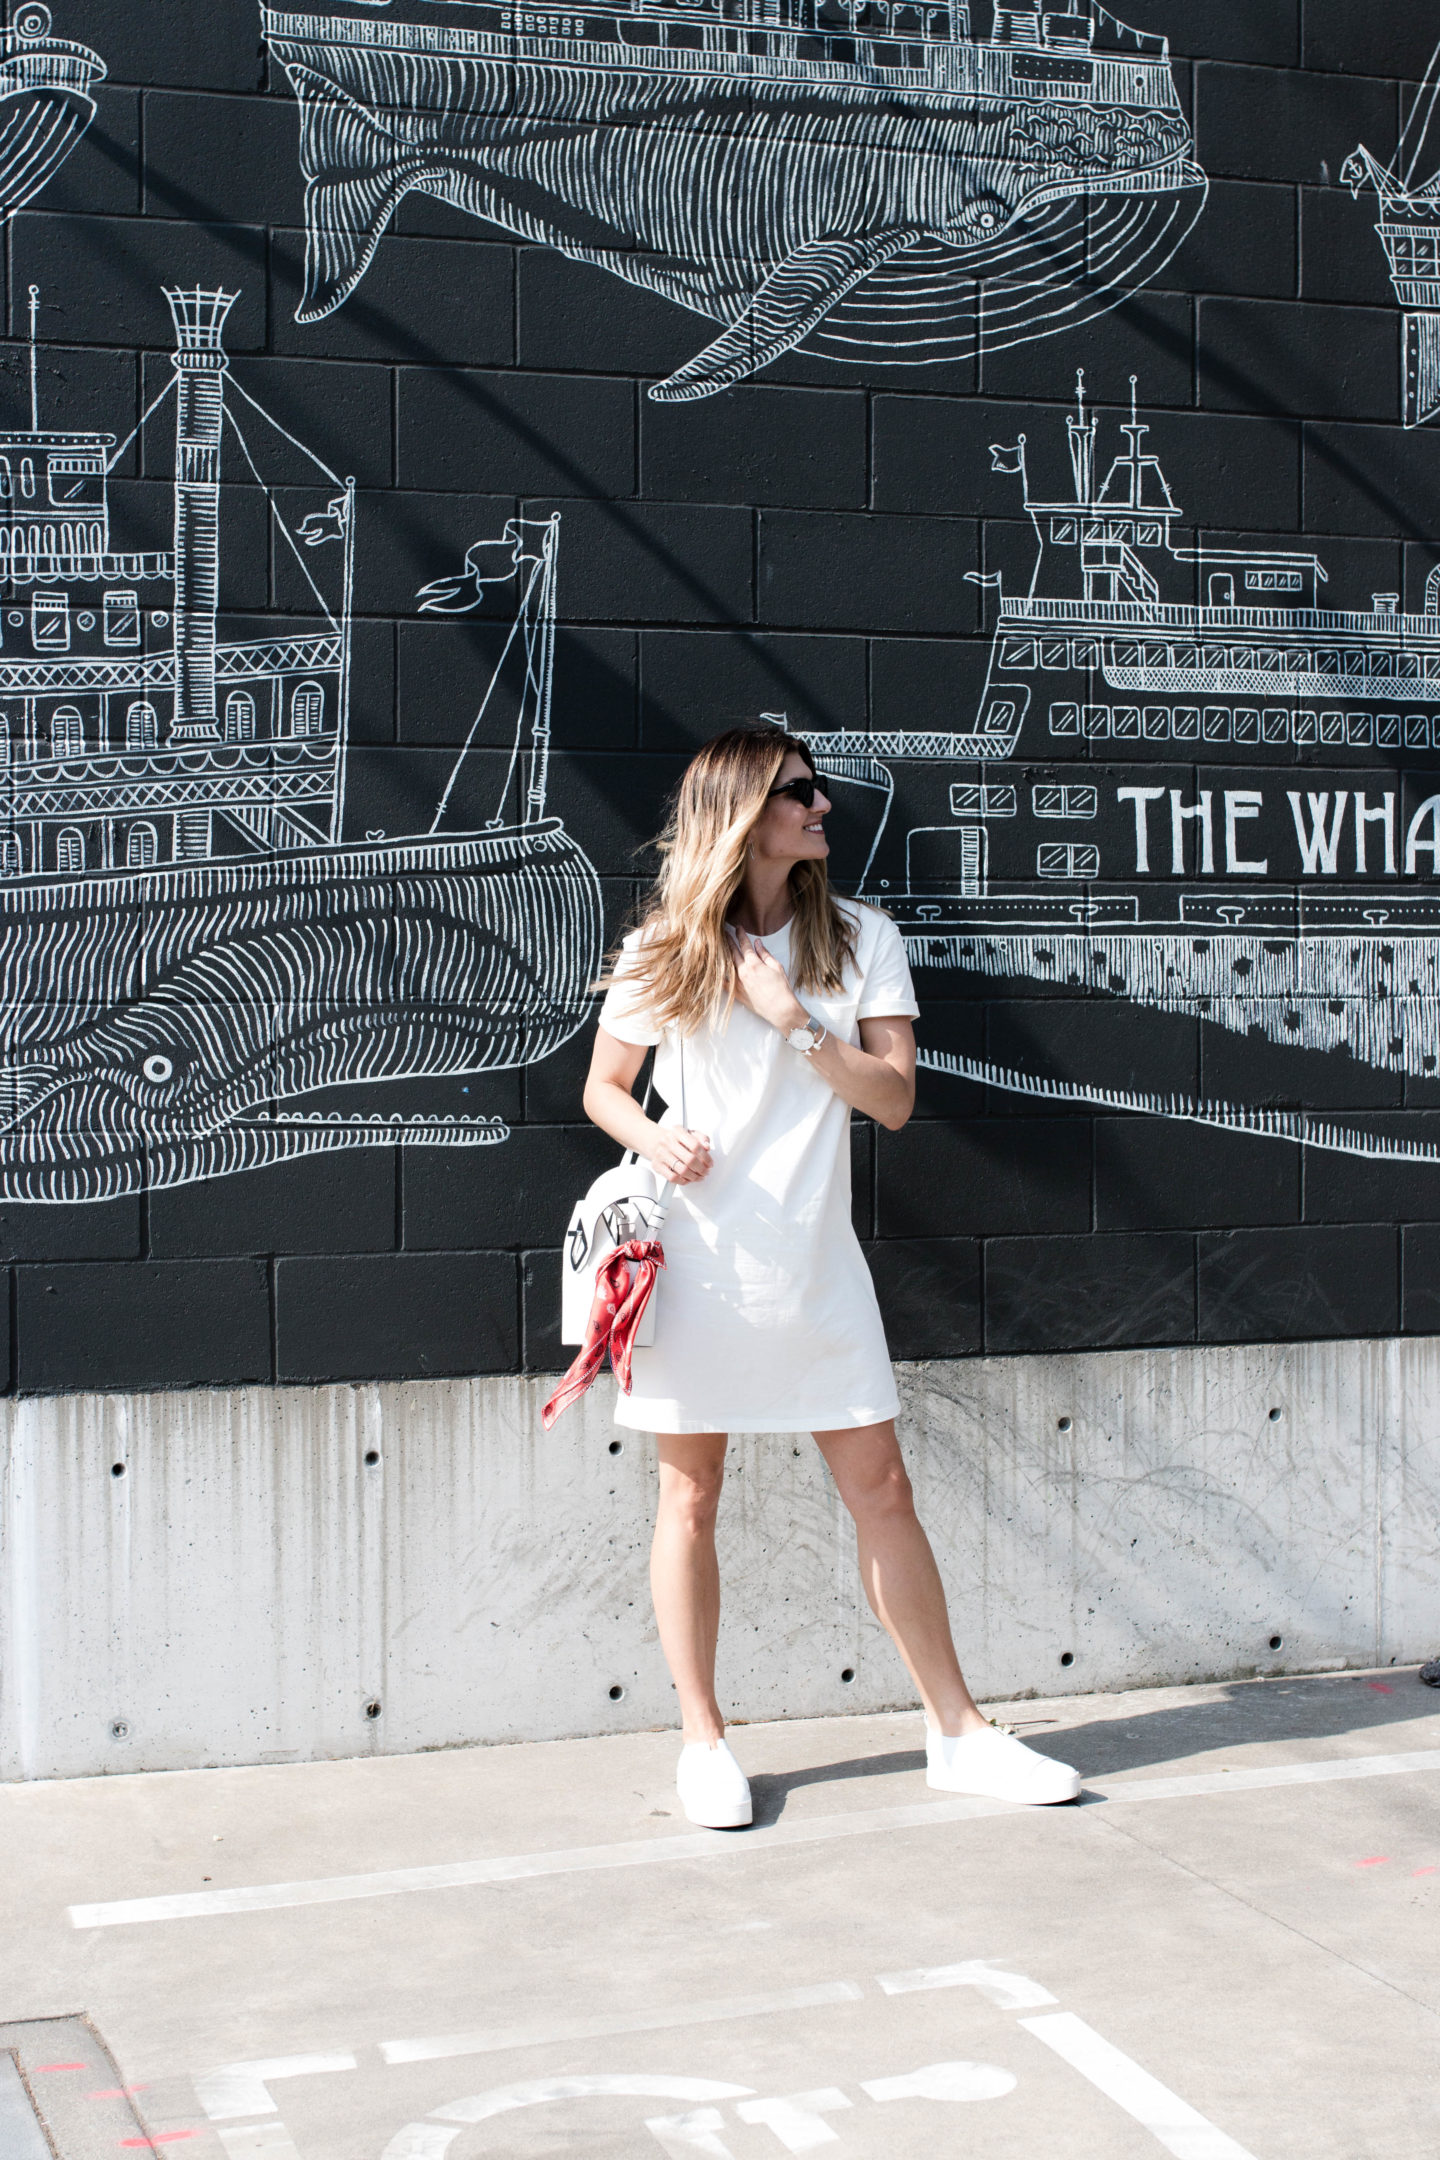 go sightseeing band Plantation The T-Shirt Dress You Need for Summer (And How to Accessorize It) -